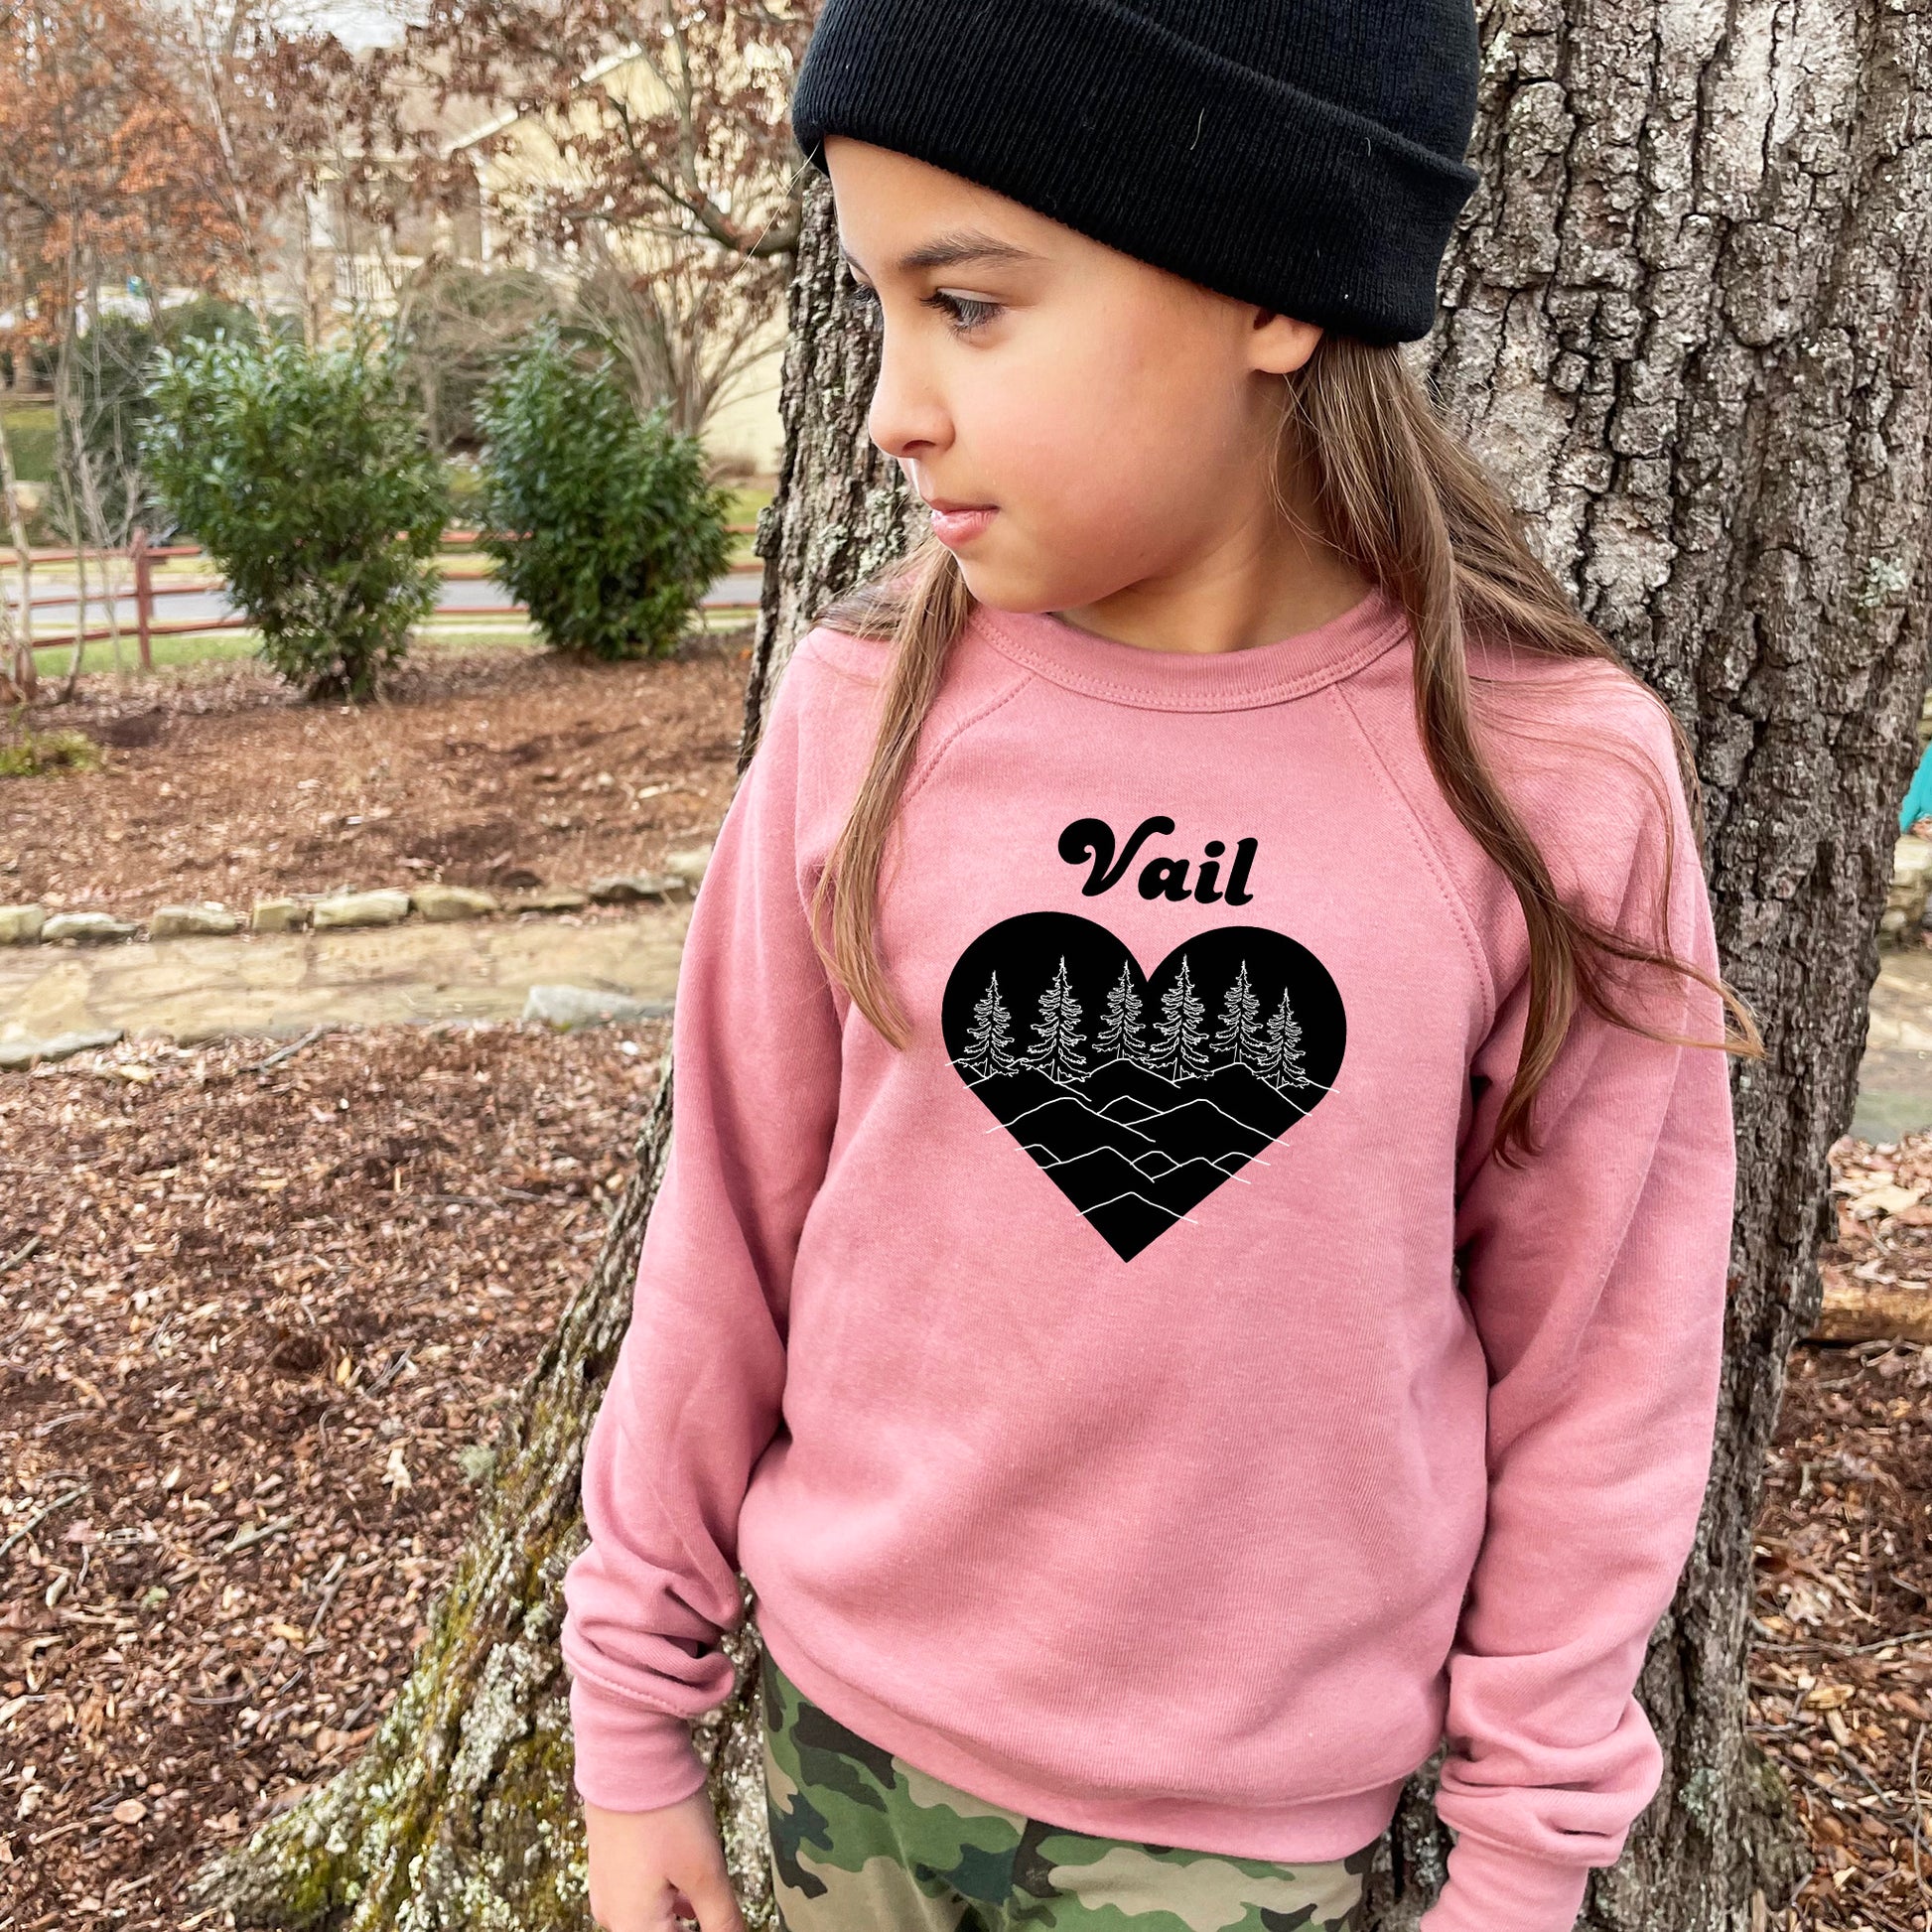 a young girl wearing a pink sweater and a black beanie